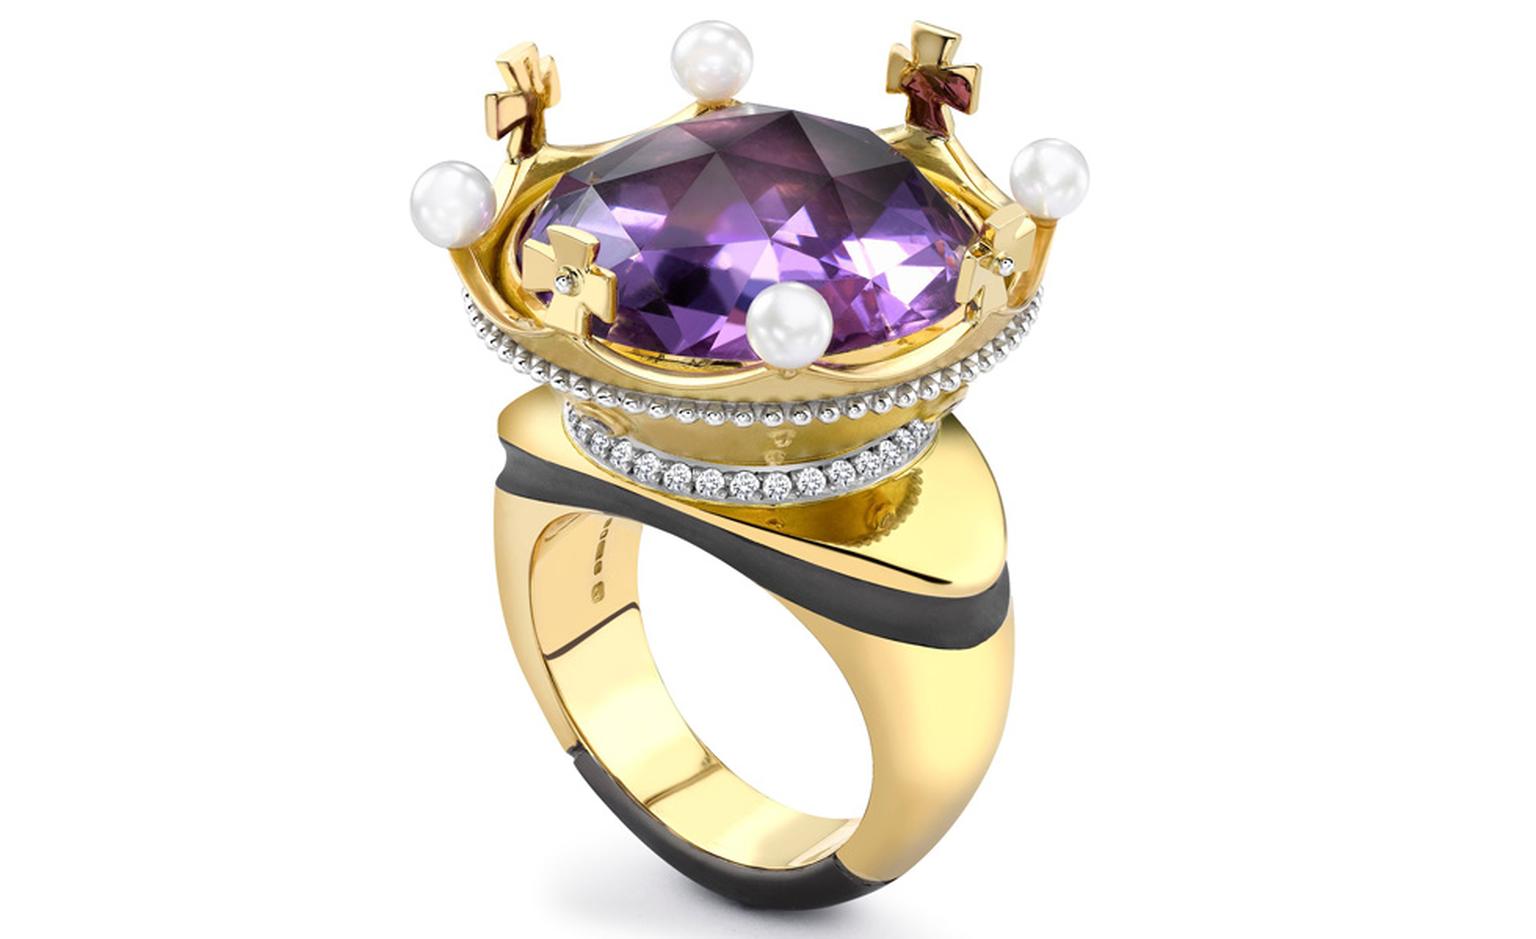 Theo Fennell 18ct Yellow & White Gold Amethyst, Diamond and Pearl Coronet Ring £12,500